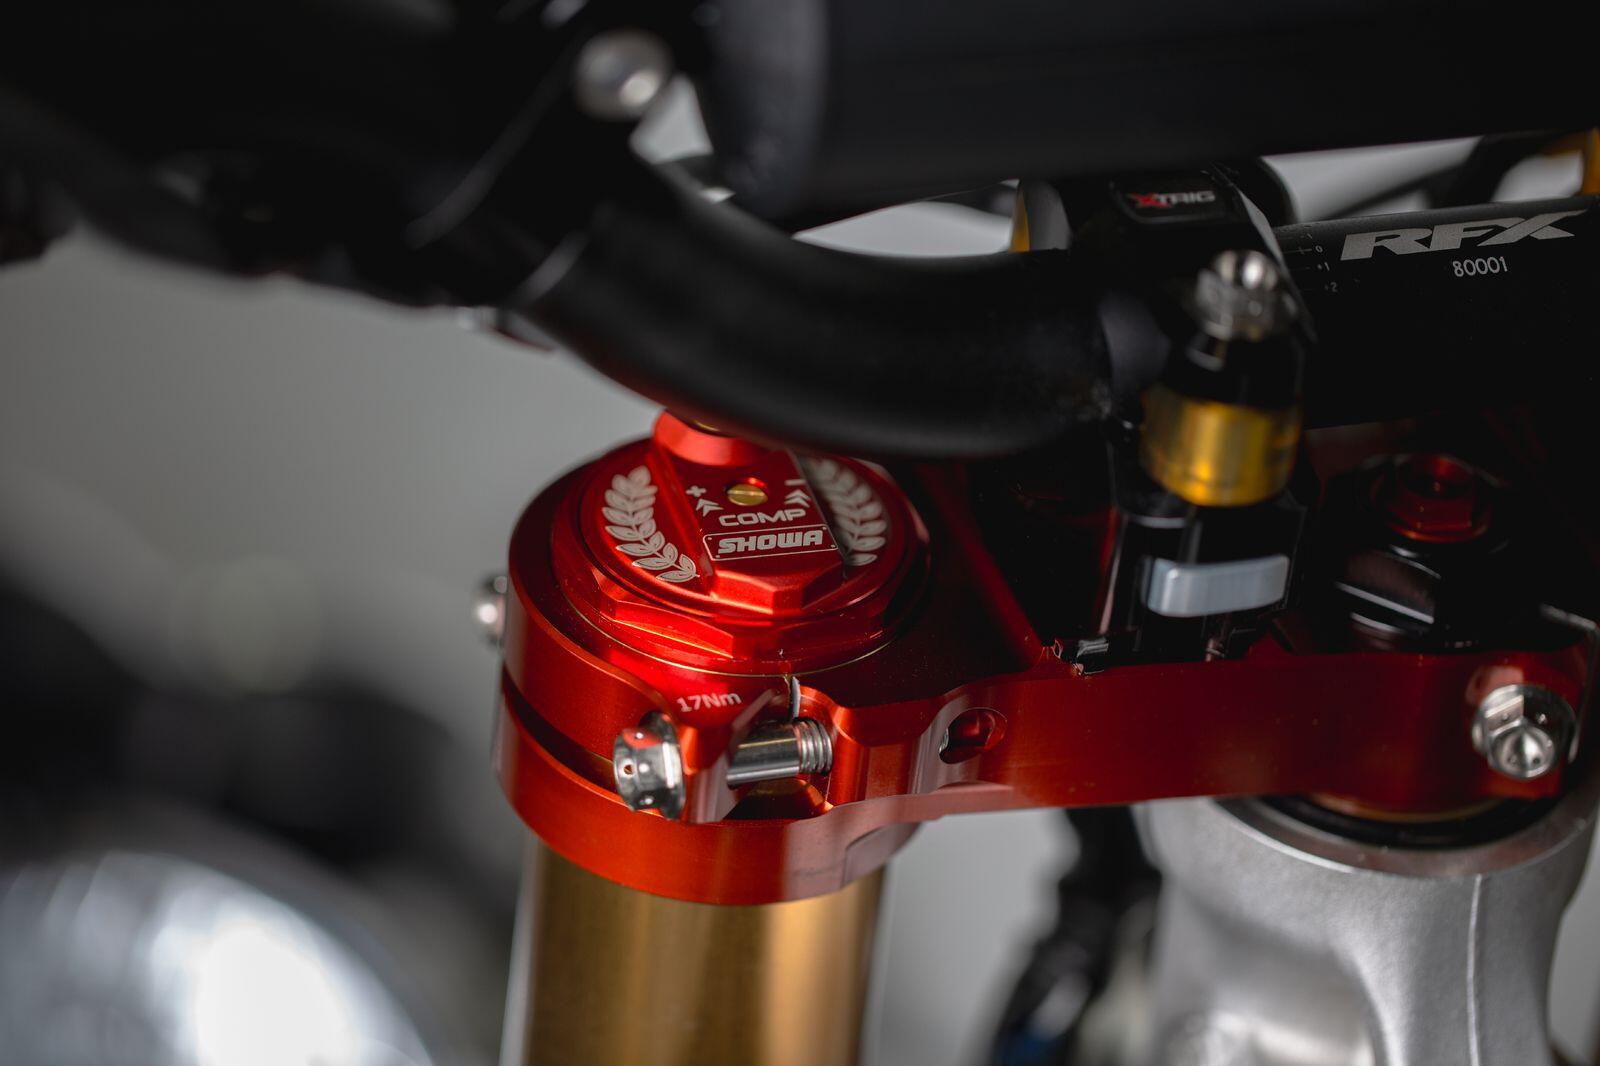 Detail of the fully adjustable A-Kit front fork